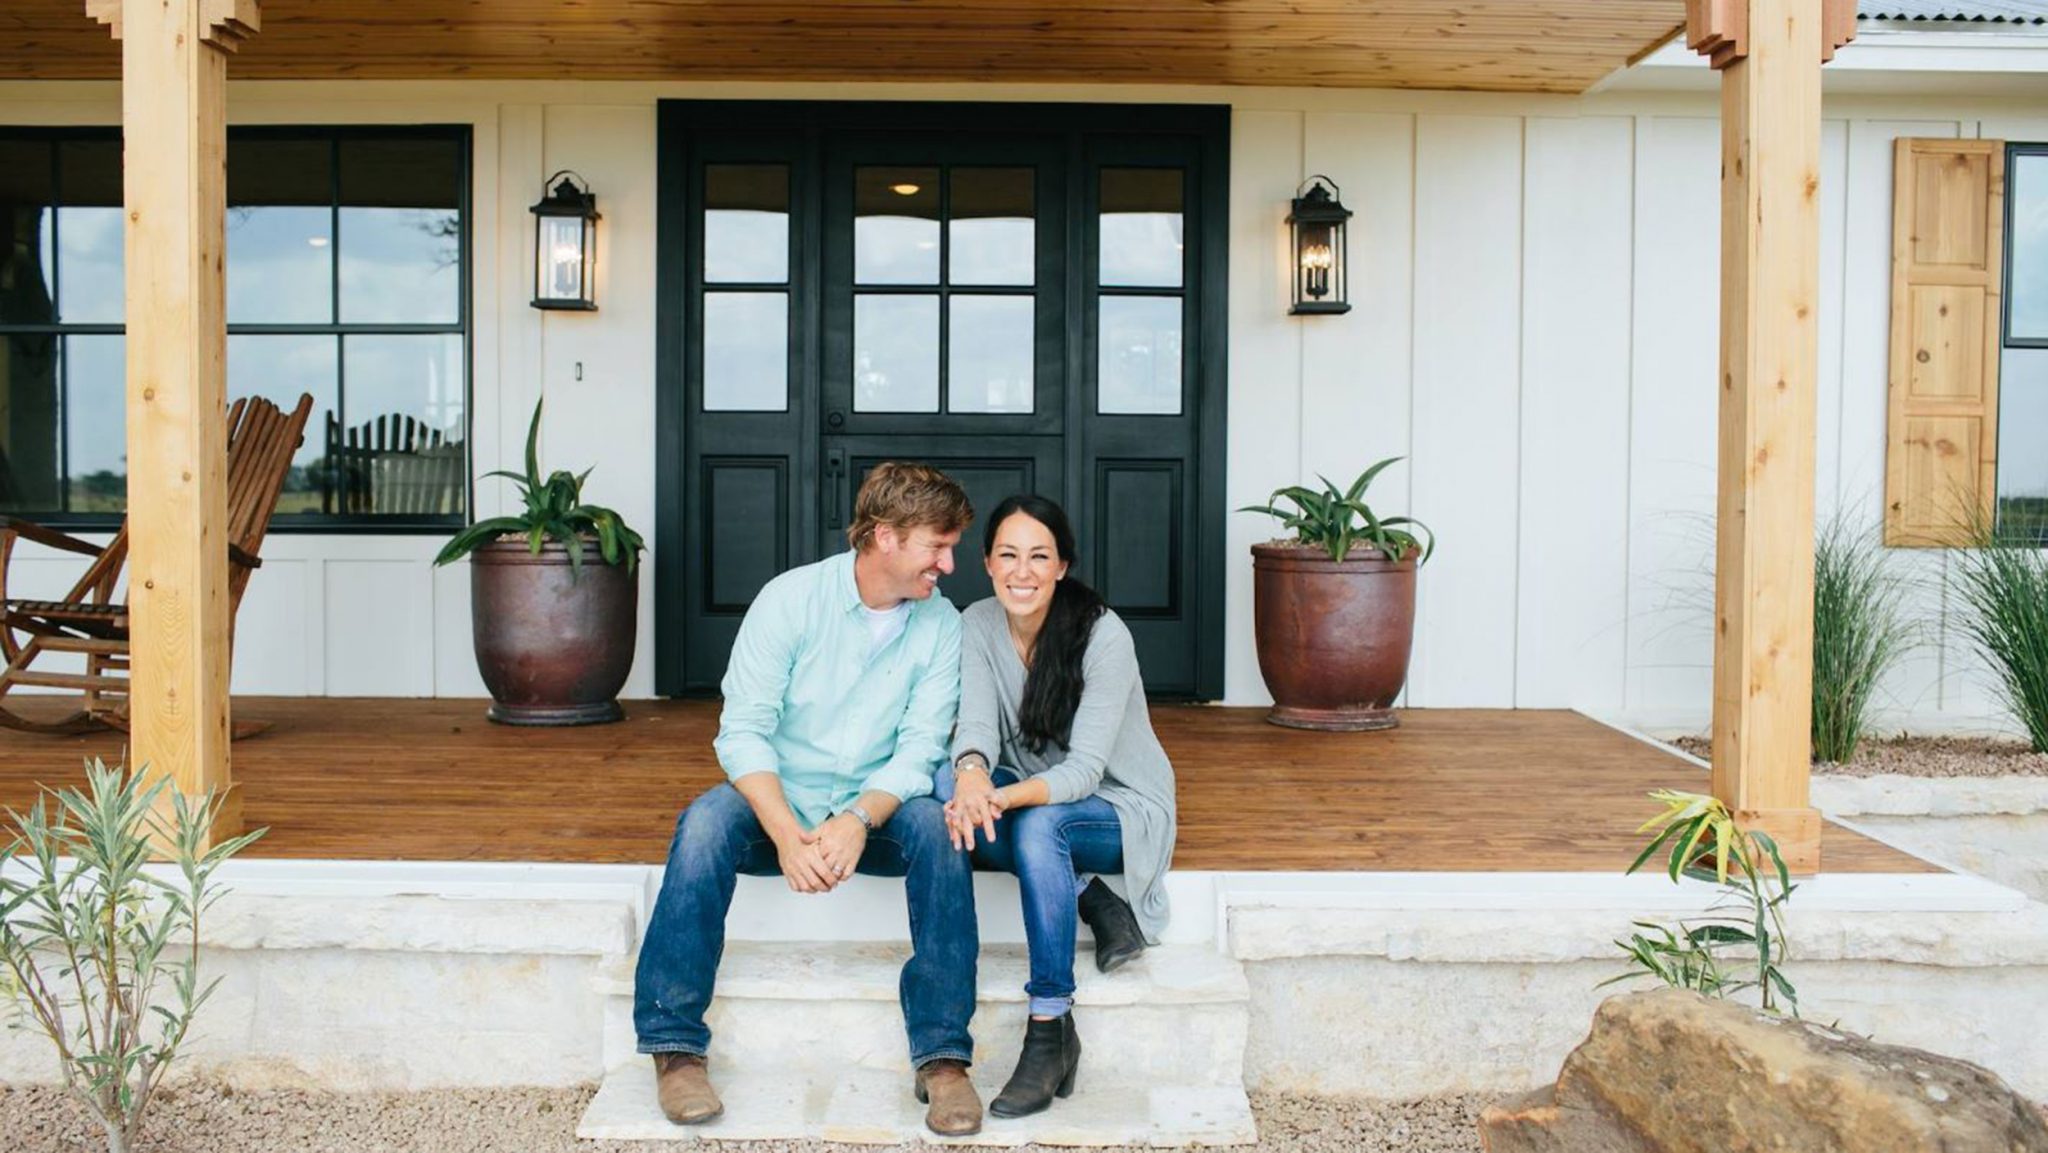 Fixer Upper's Chip and Joanna Gaines' New Show